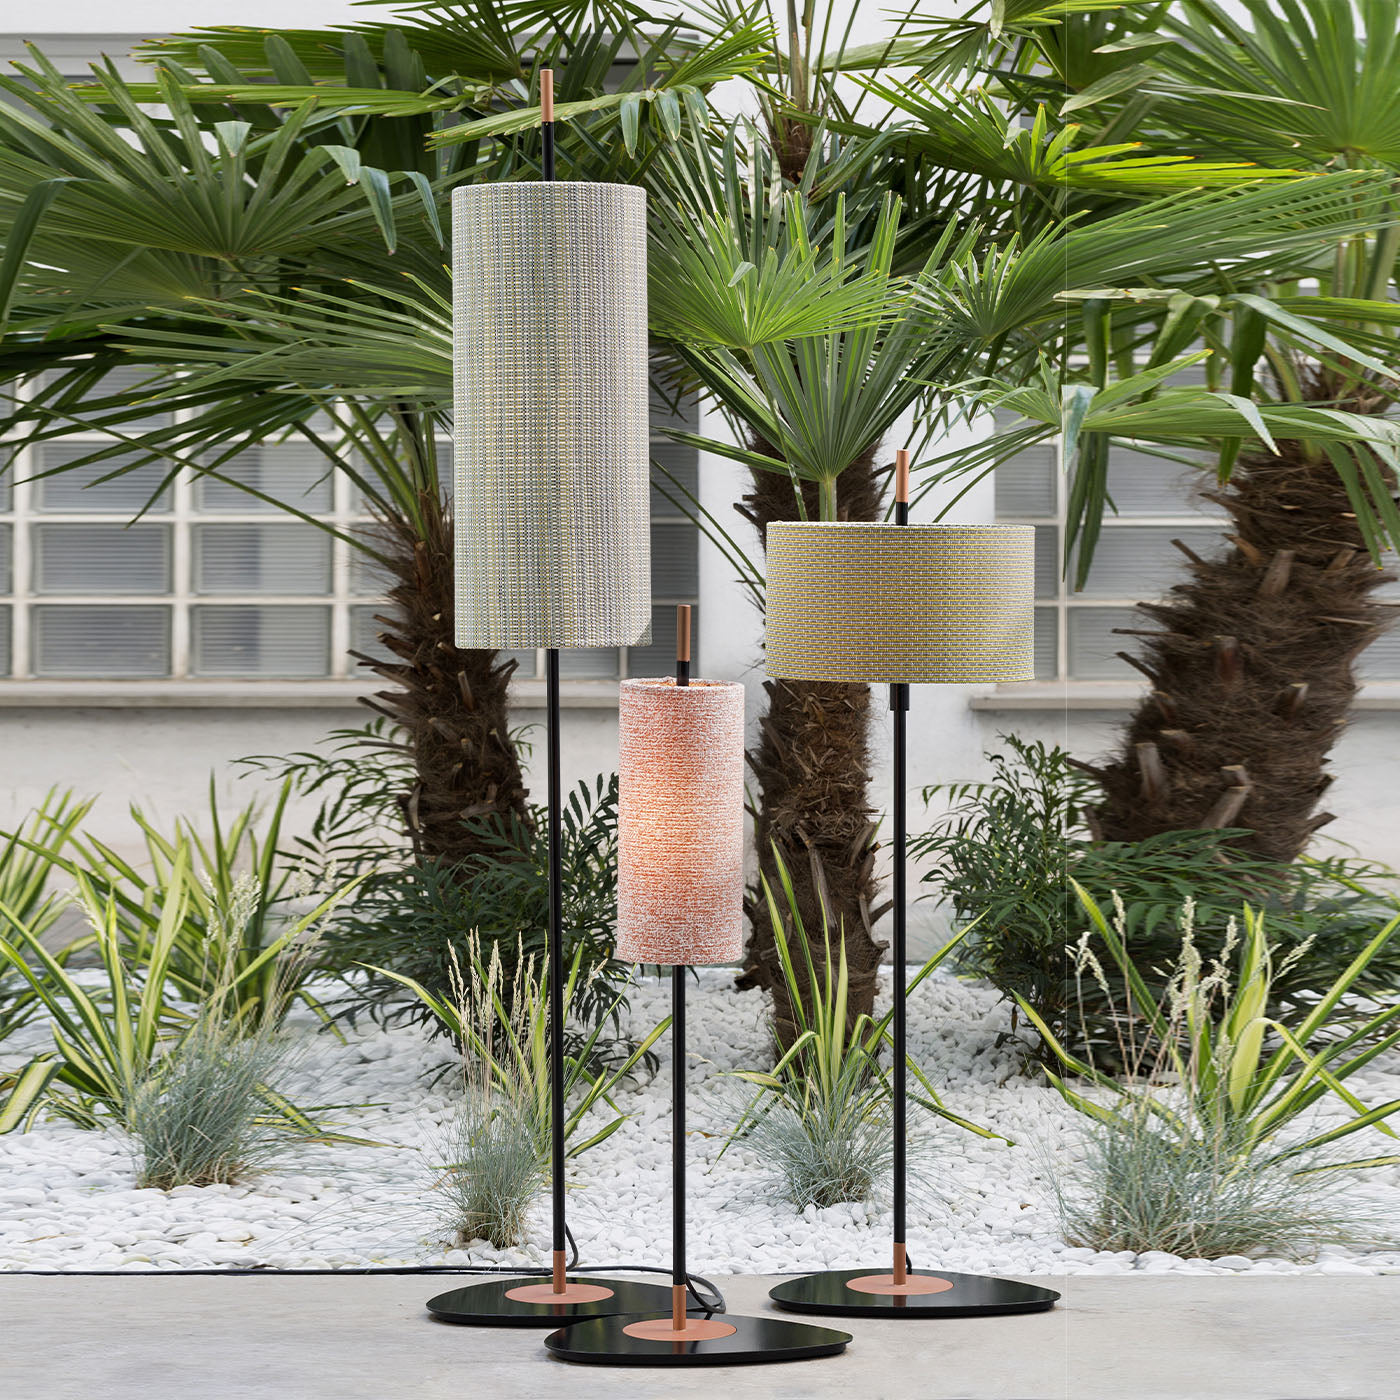 Lagoon Noumea Goyave Small Outdoor Floor Lamp by Servomuto - Alternative view 1